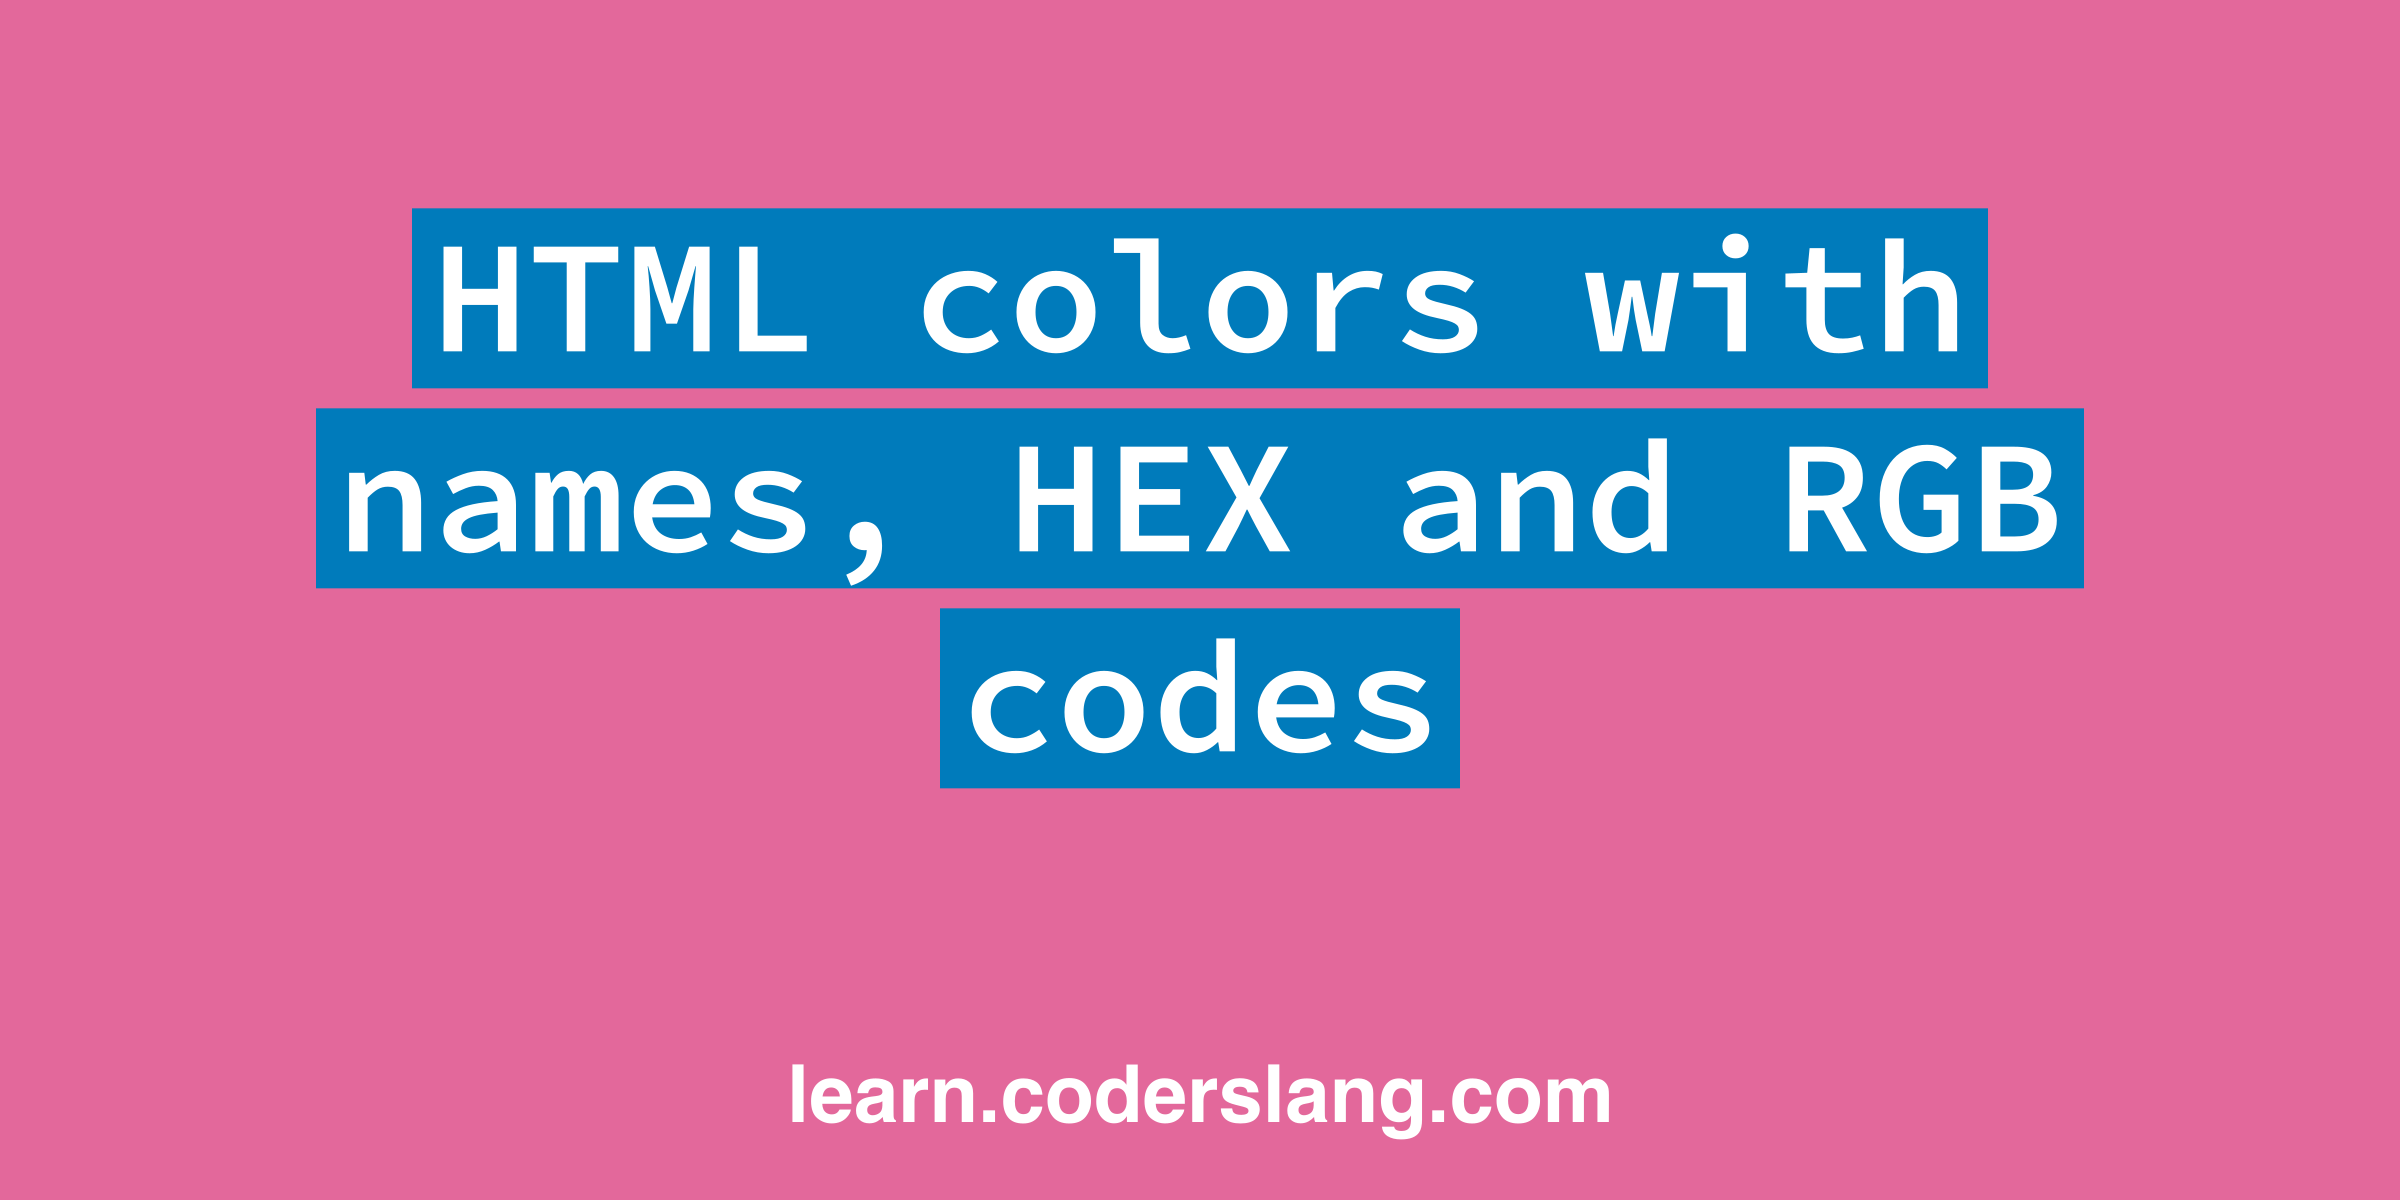 20 HTML colors with HEX, RGB codes and names